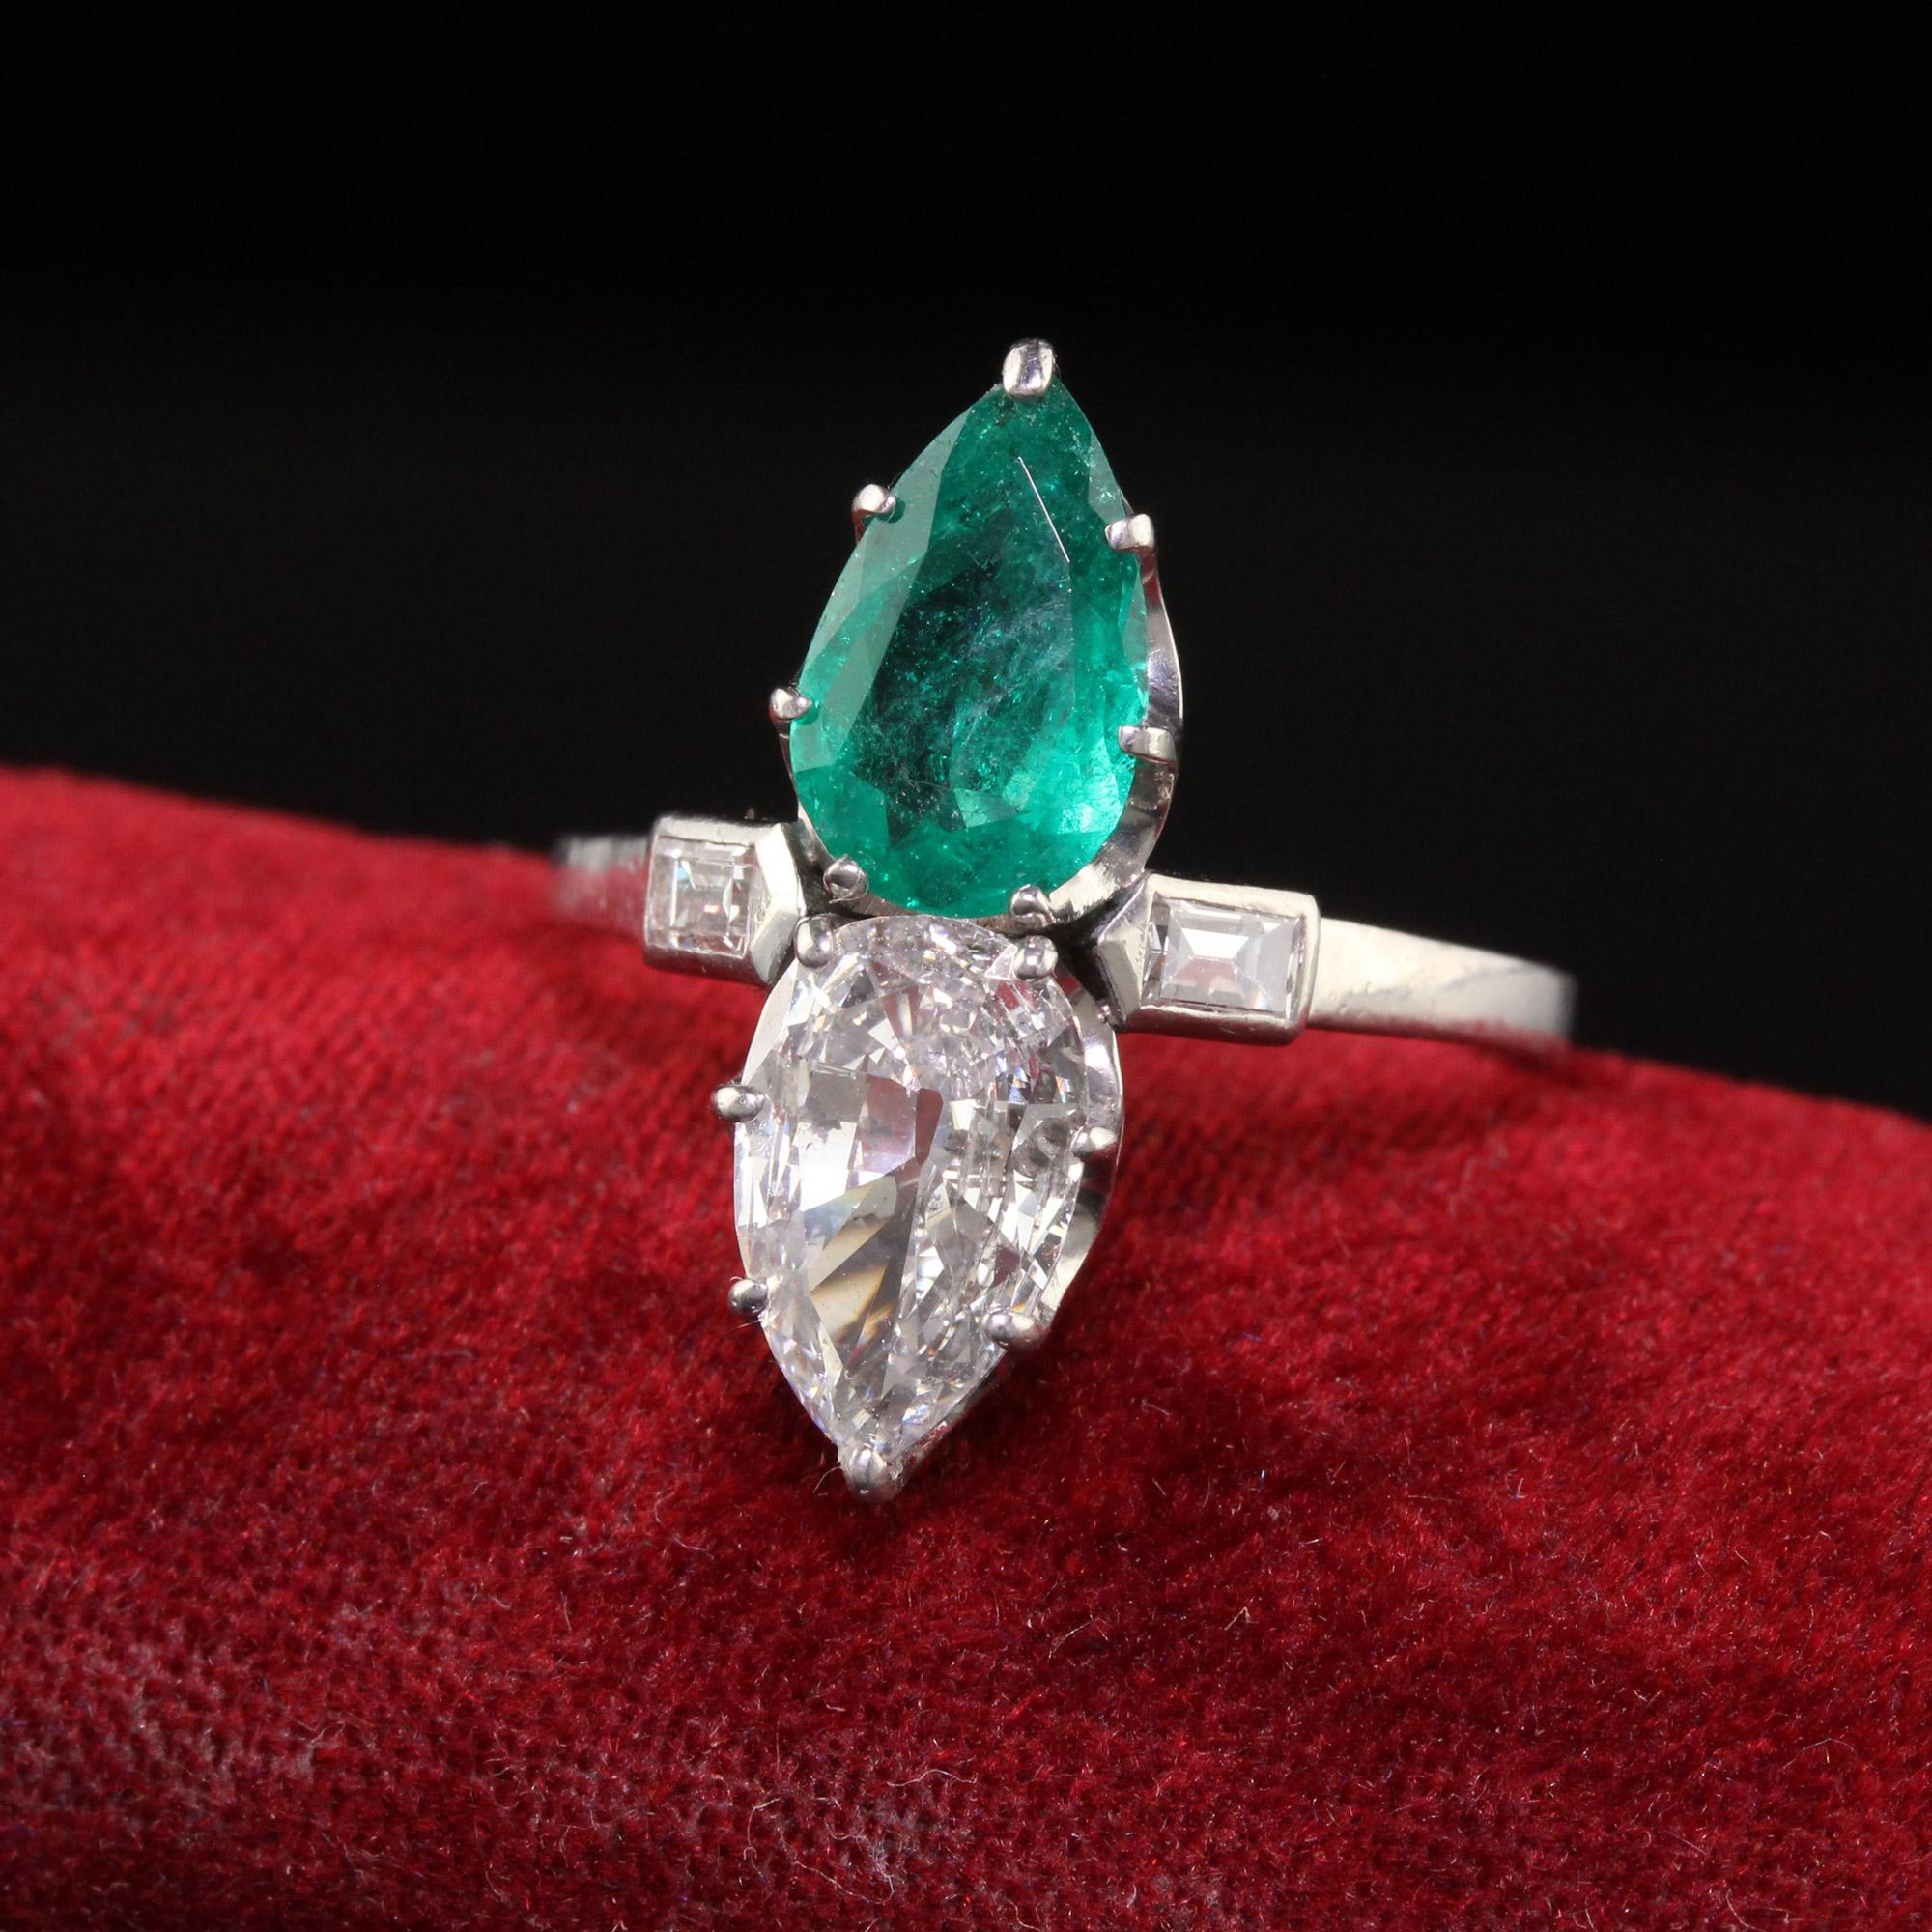 Beautiful Antique Art Deco Platinum French Pear Diamond Emerald Engagement Ring - GIA. This incredible engagement ring is crafted in platinum. The ring has an old pear shape diamond and emerald that have GIA reports. The gorgeous setting is French